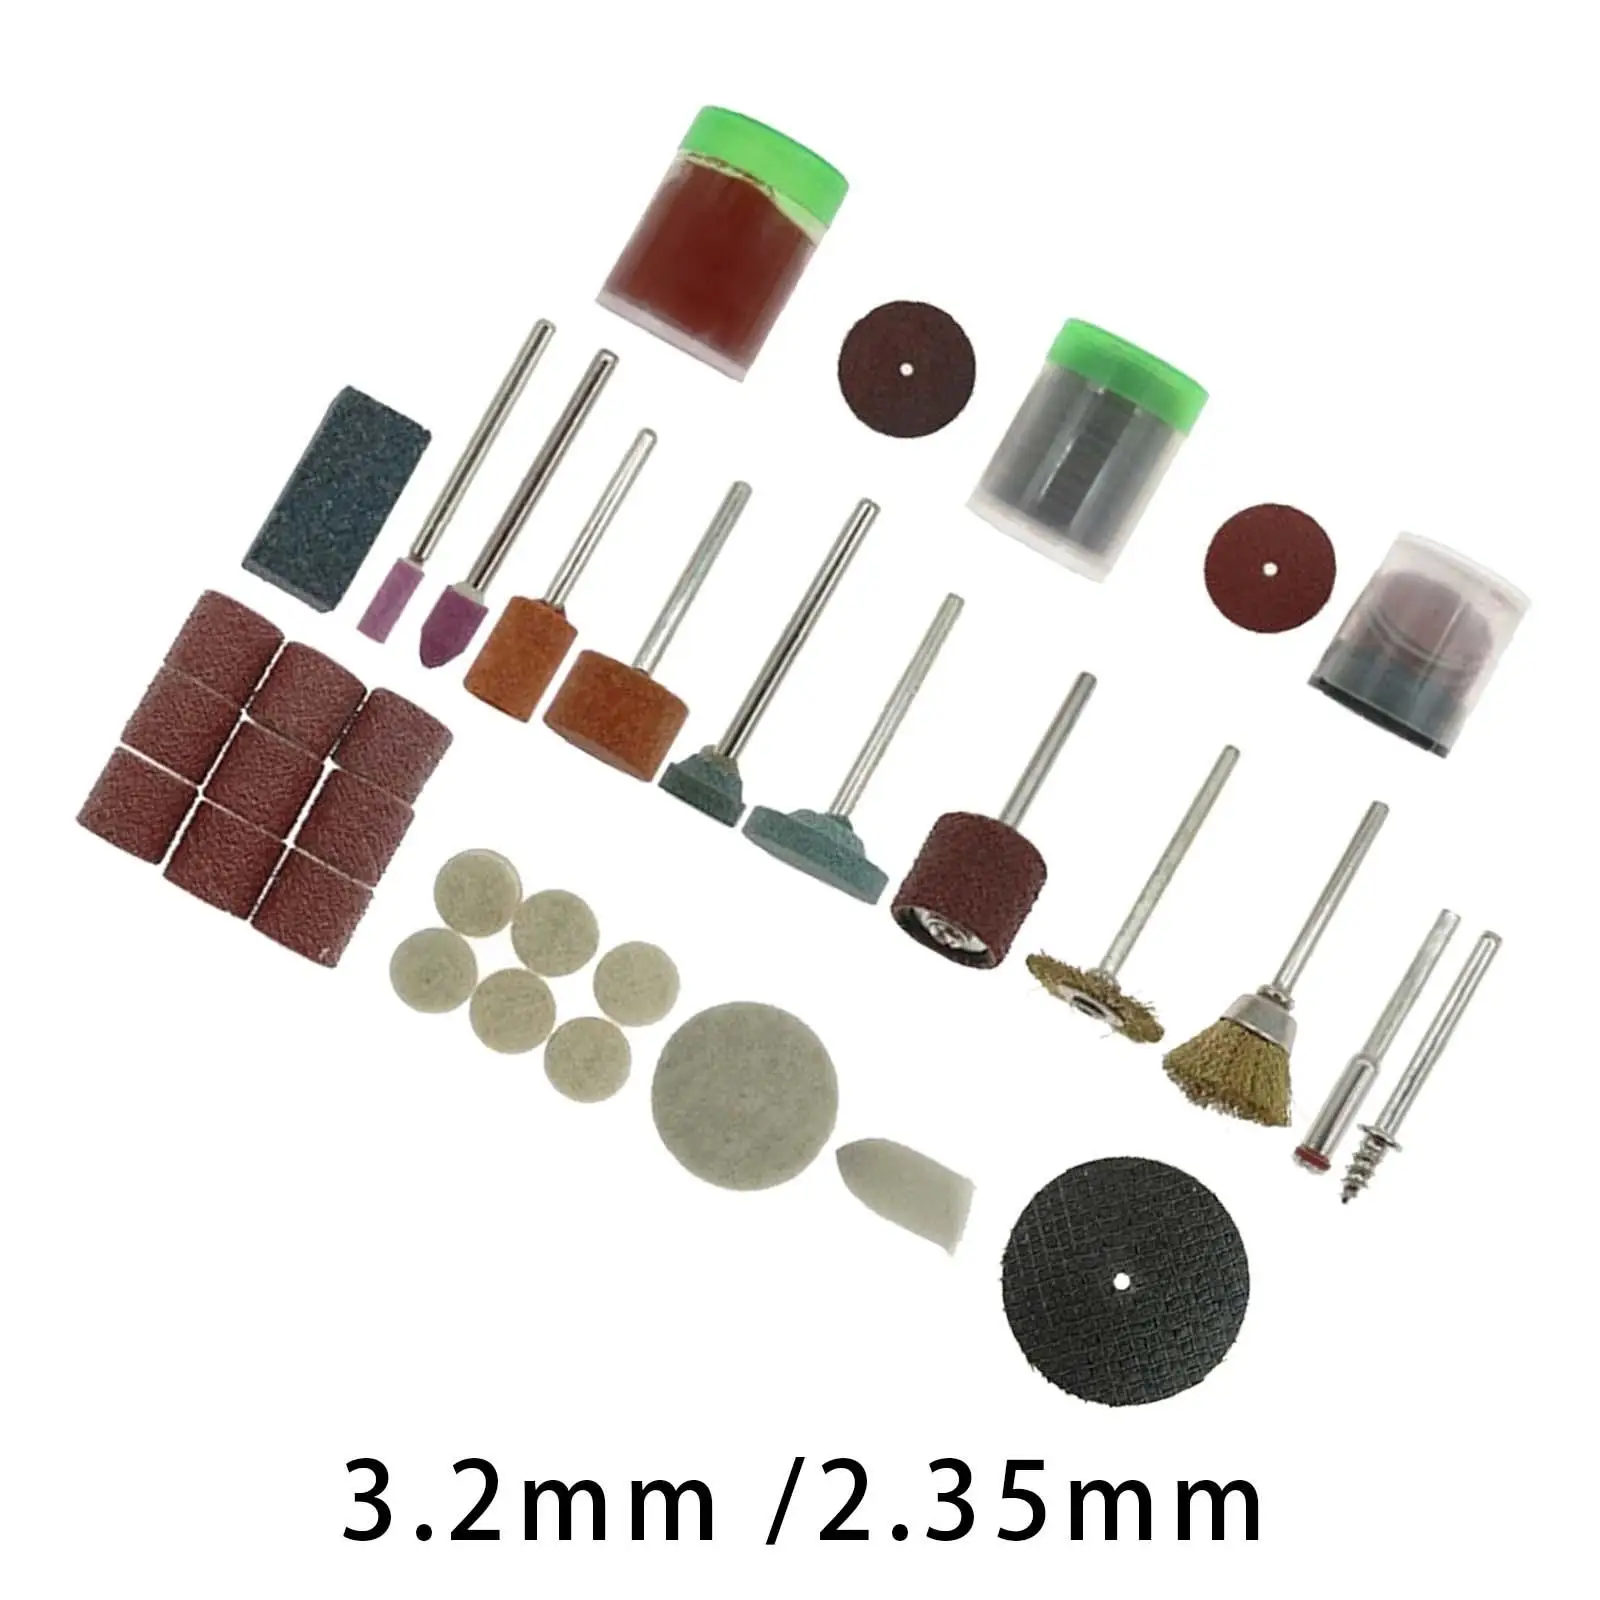 105x Electric Grinder Drill Accessories Compact Grinder Set for Polishing Carving Grinding DIY Crafts Projects Sanding